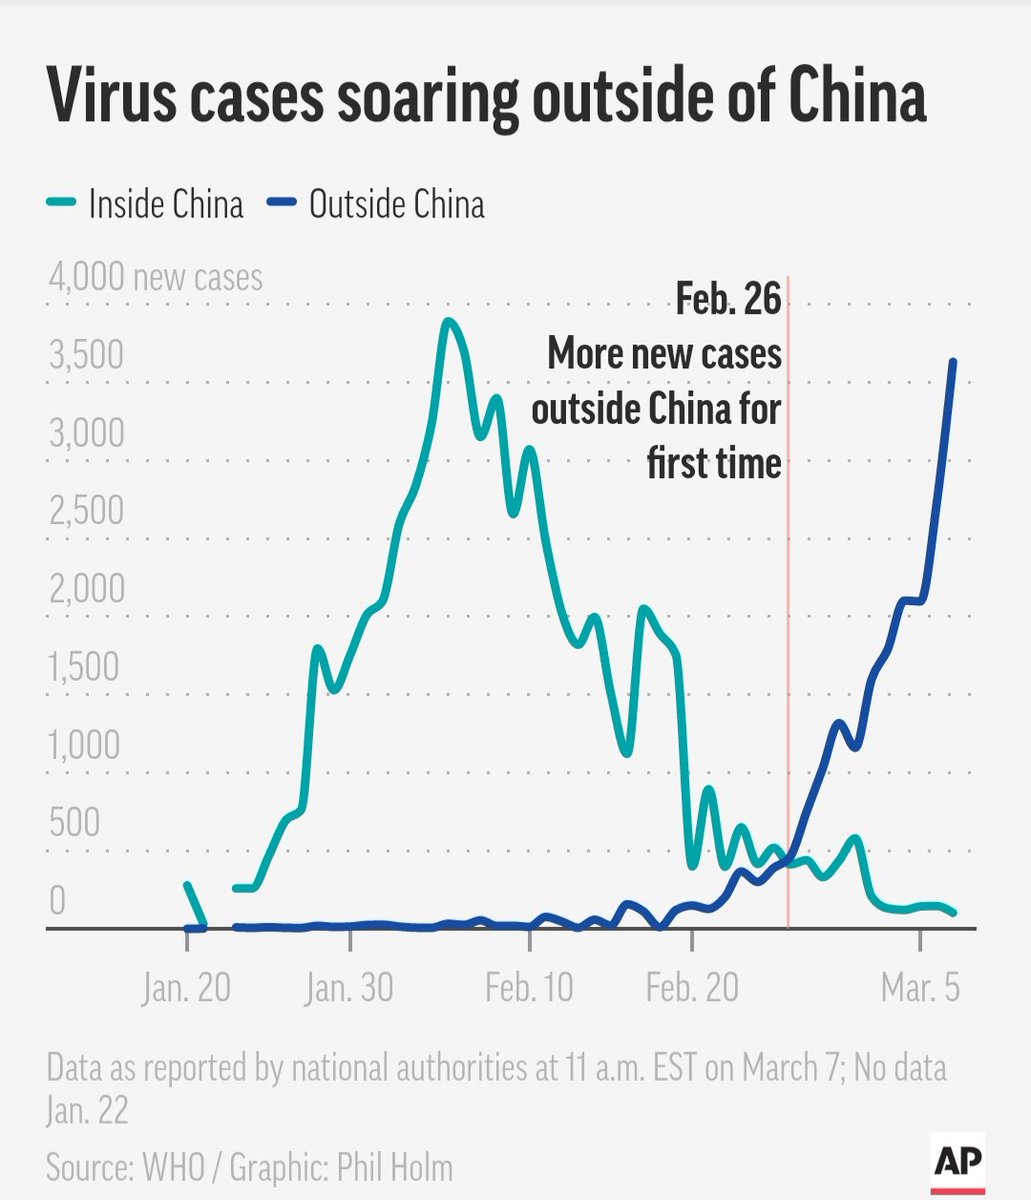 For those who thought quarantining Wuhan was just an authoritarian overreaction - Italy extends quarantine to entire country. It was always about public health and state capacity. China bought us time (the month of Feb) that was squandered outside Asia  https://www.ft.com/content/21d94d40-6251-11ea-a6cd-df28cc3c6a68?shareType=nongift